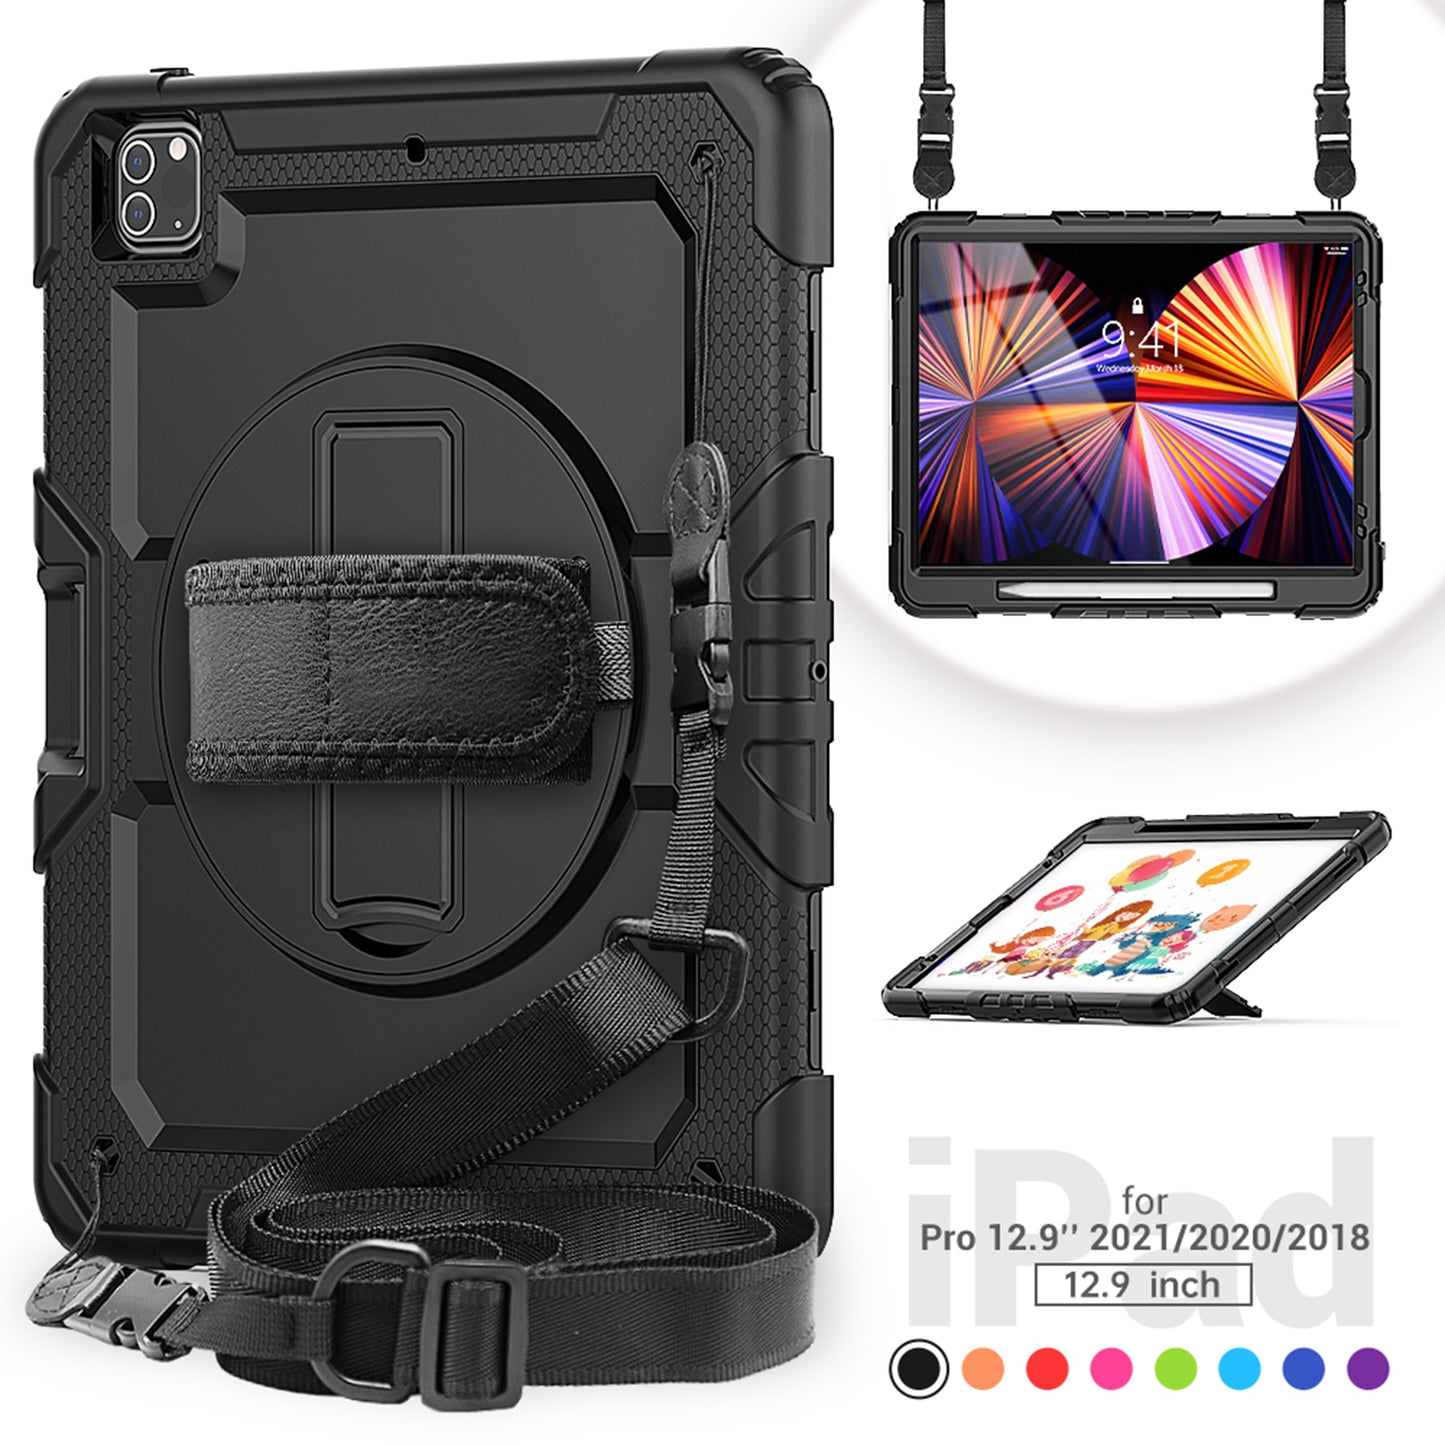 iPad Pro 12.9 inch Case with Hand Strap Pen Holder Rotating Stand